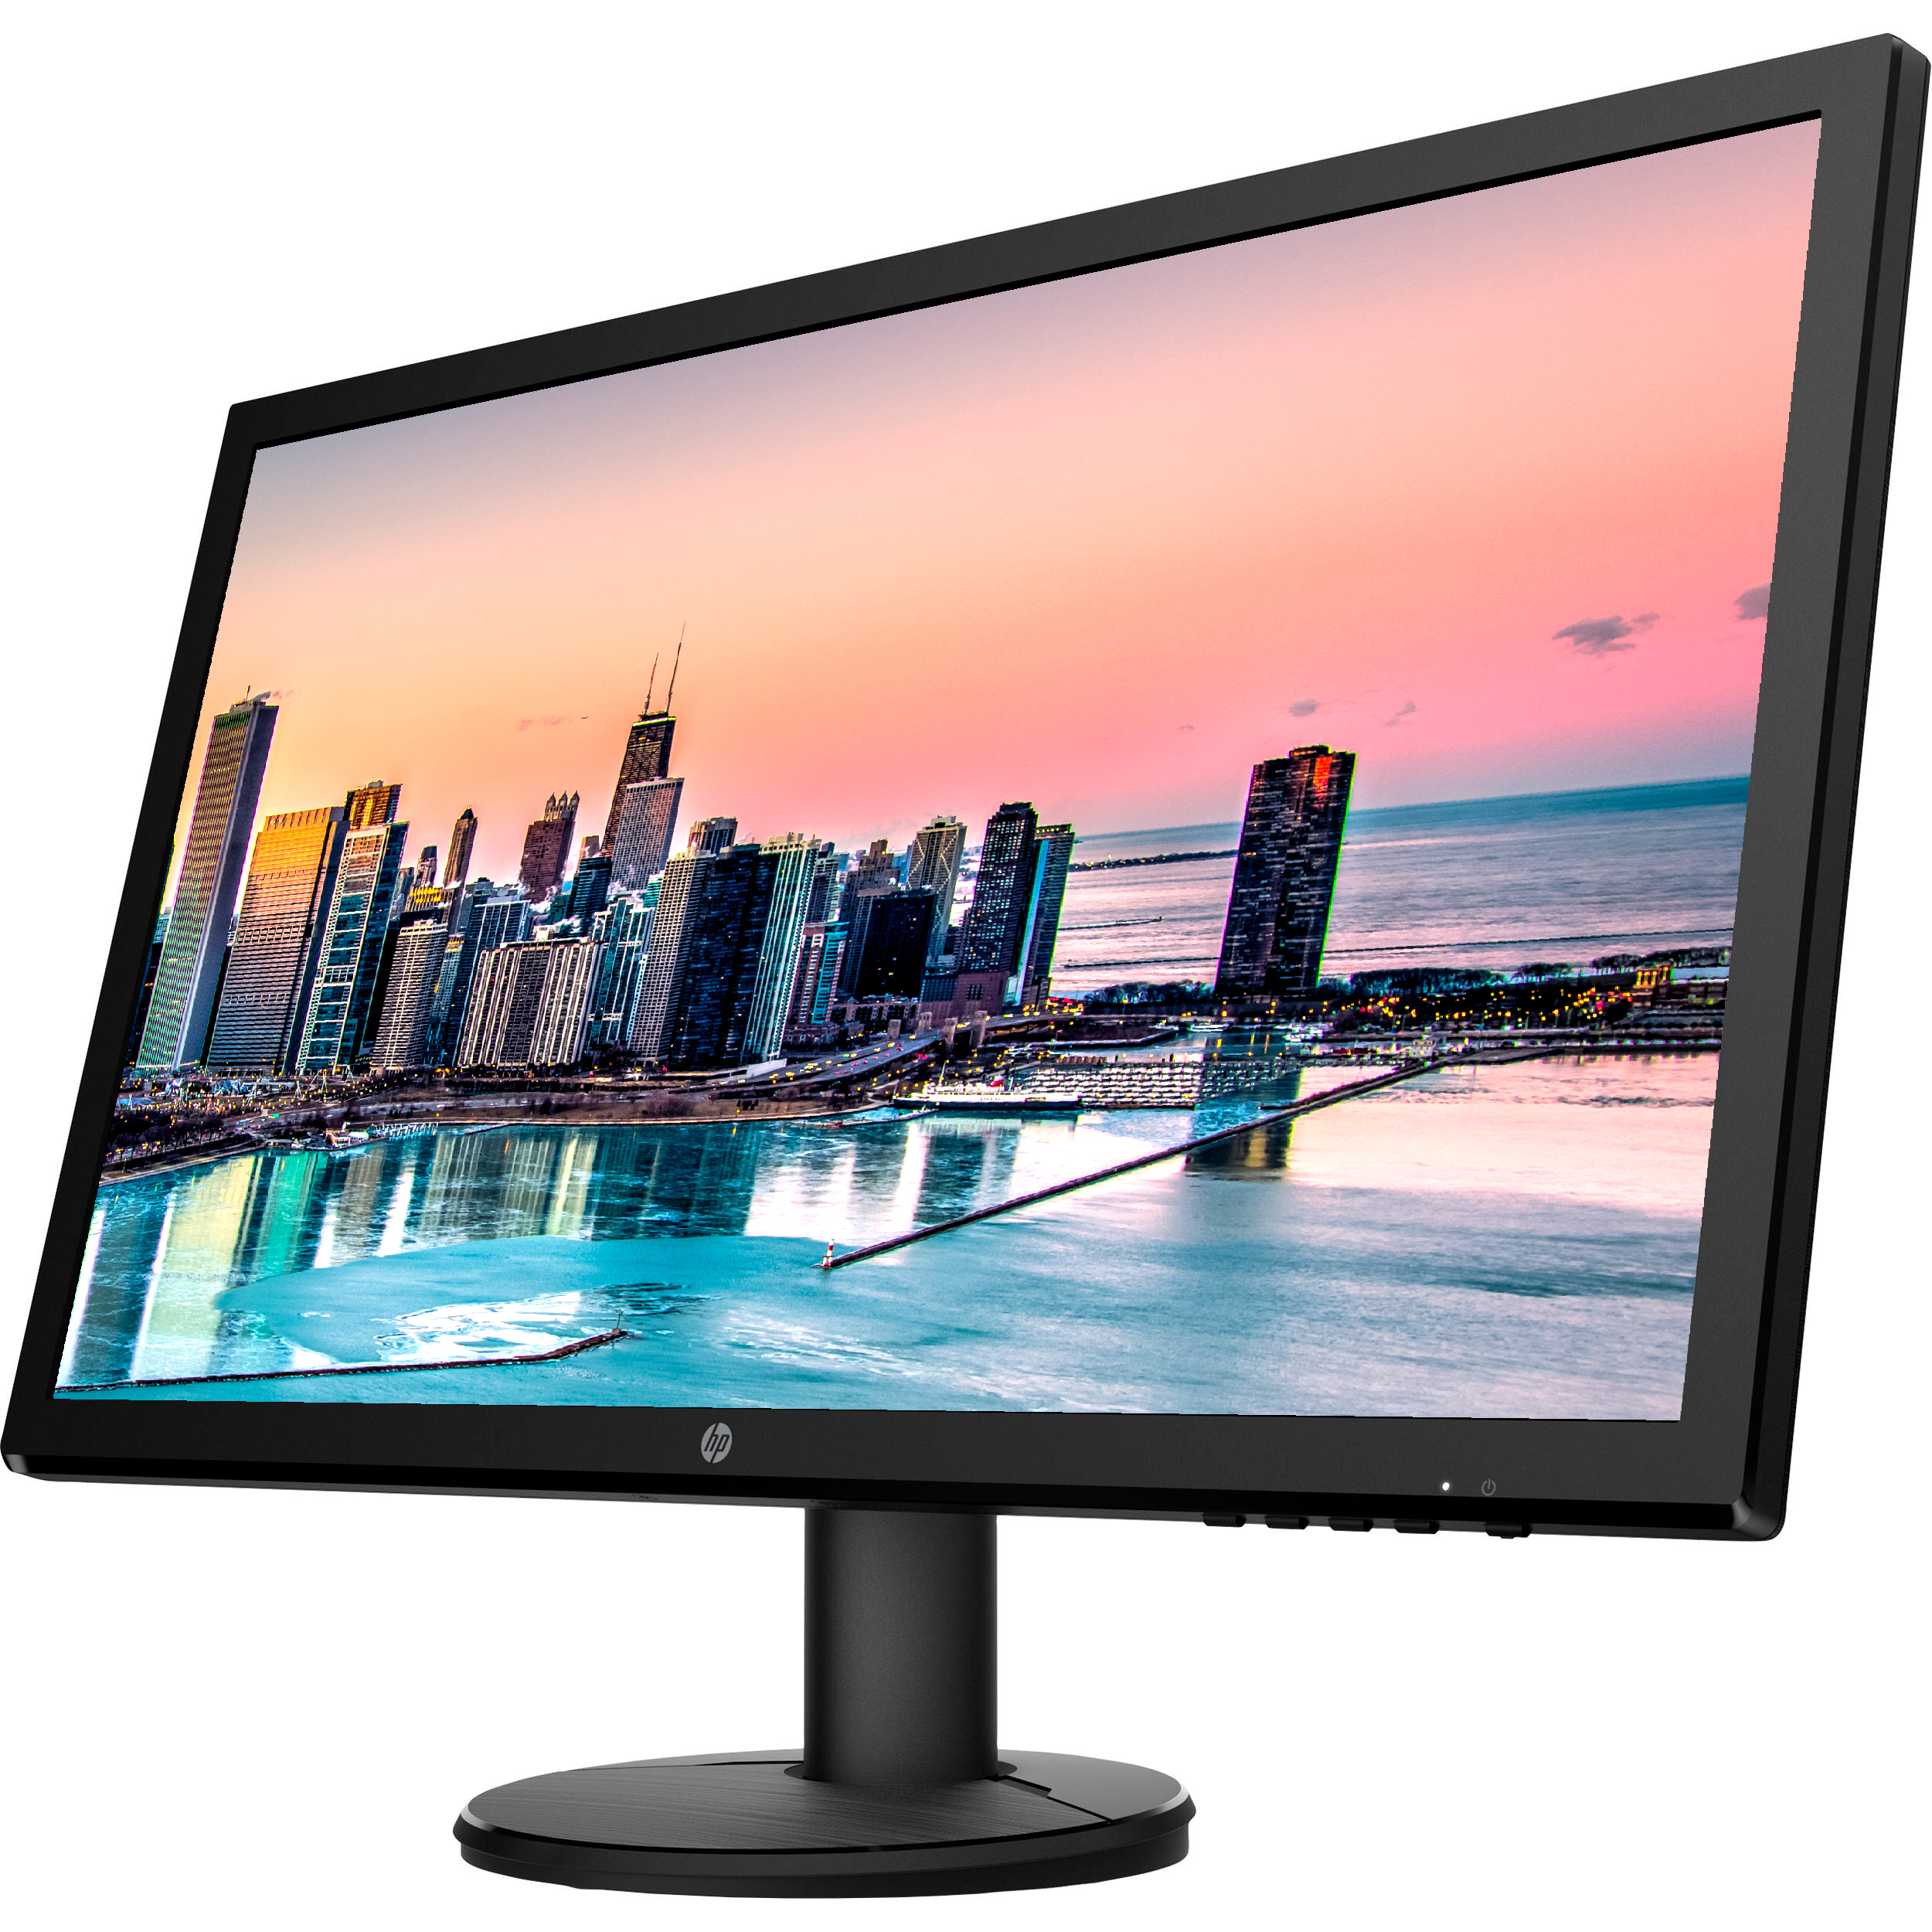 HP V24 24 inch TN Full HD 1920 x 1080 LED Backlit LCD Monitor 2-Pack Bundle  with HDMI  VGA ports, FreeSync, 75Hz Refresh Rate, Low Blue Light, Desk  Mount Clamp Dual